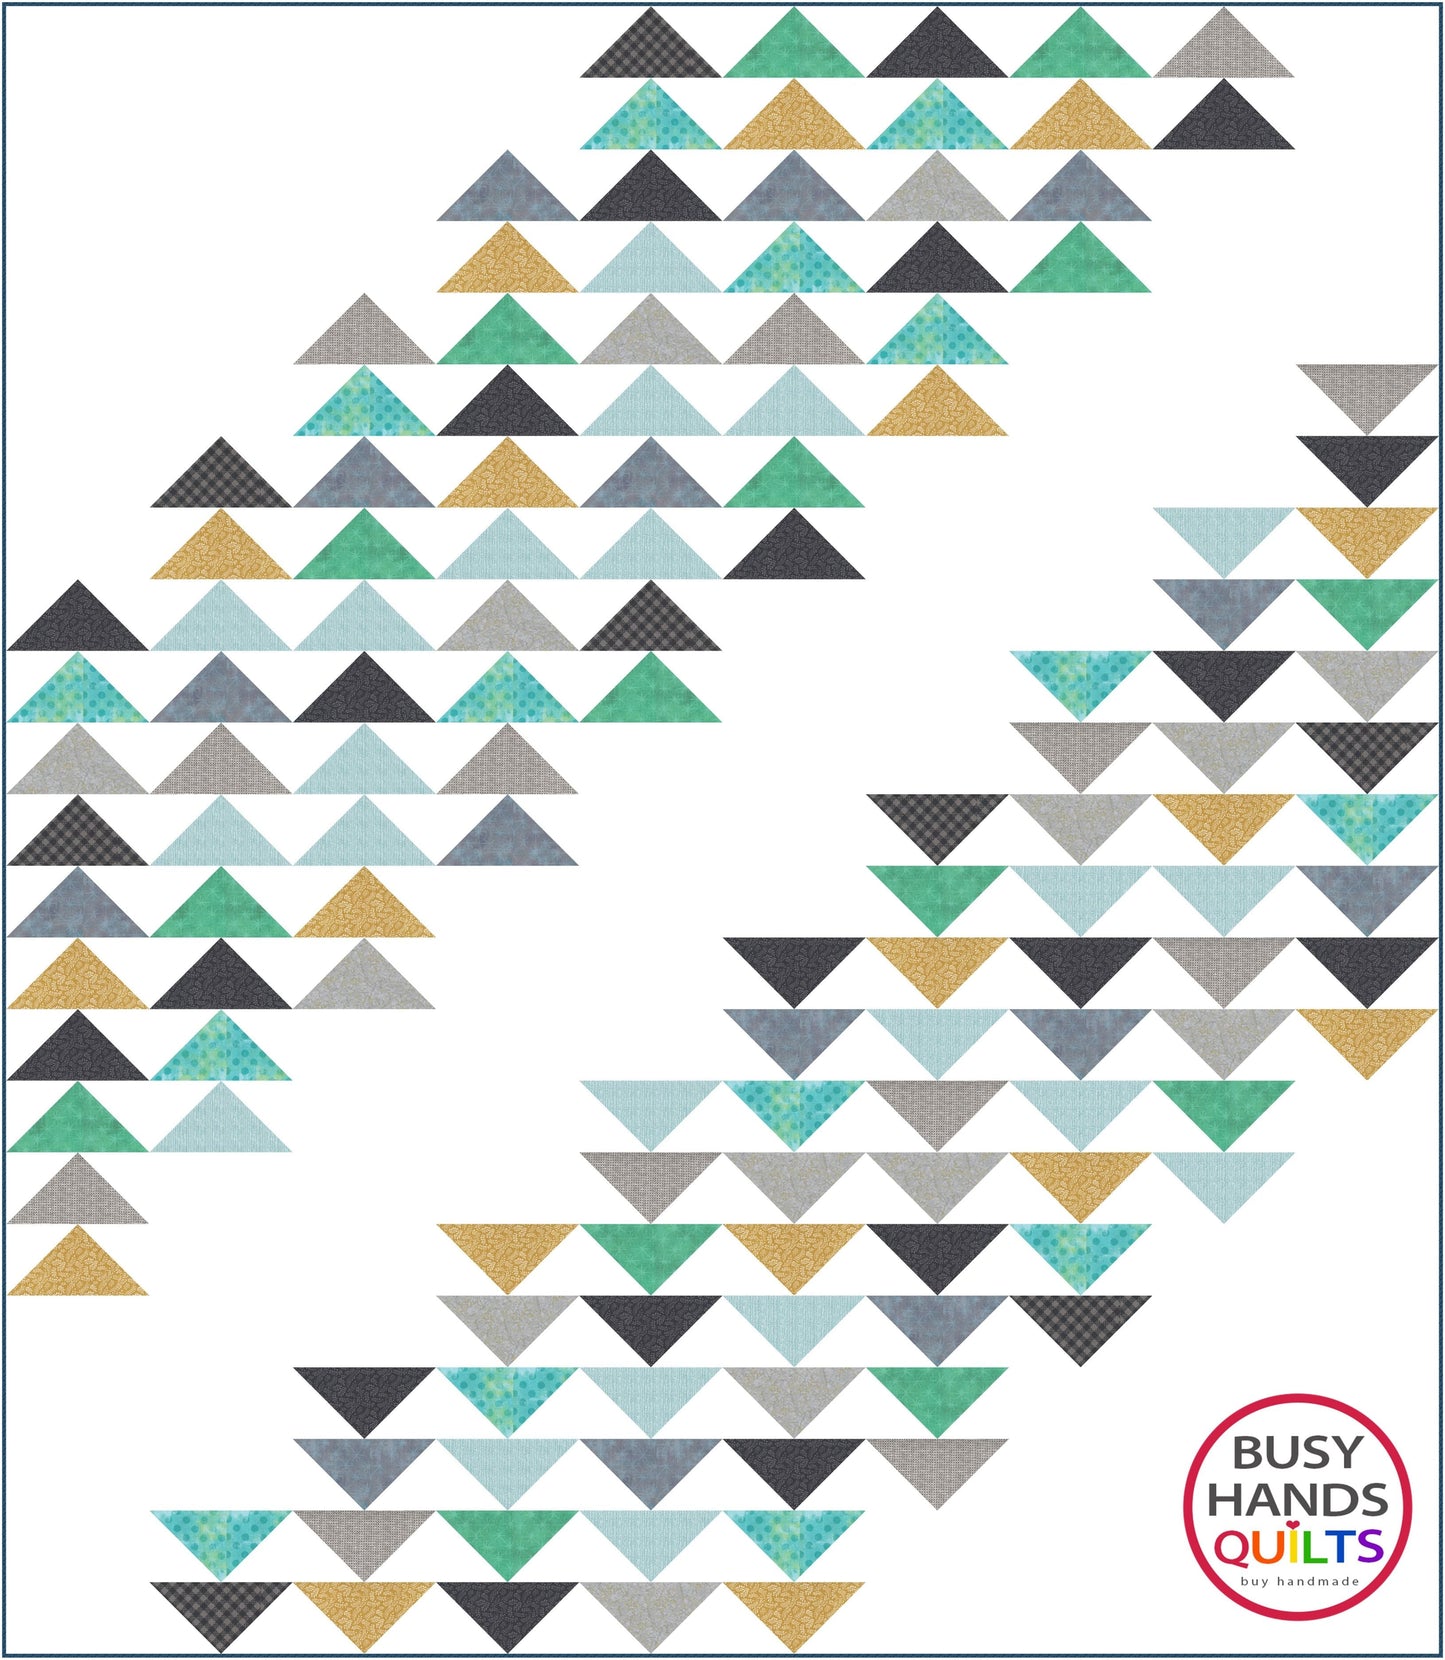 Formation Quilt Pattern PDF DOWNLOAD Busy Hands Quilts $12.99